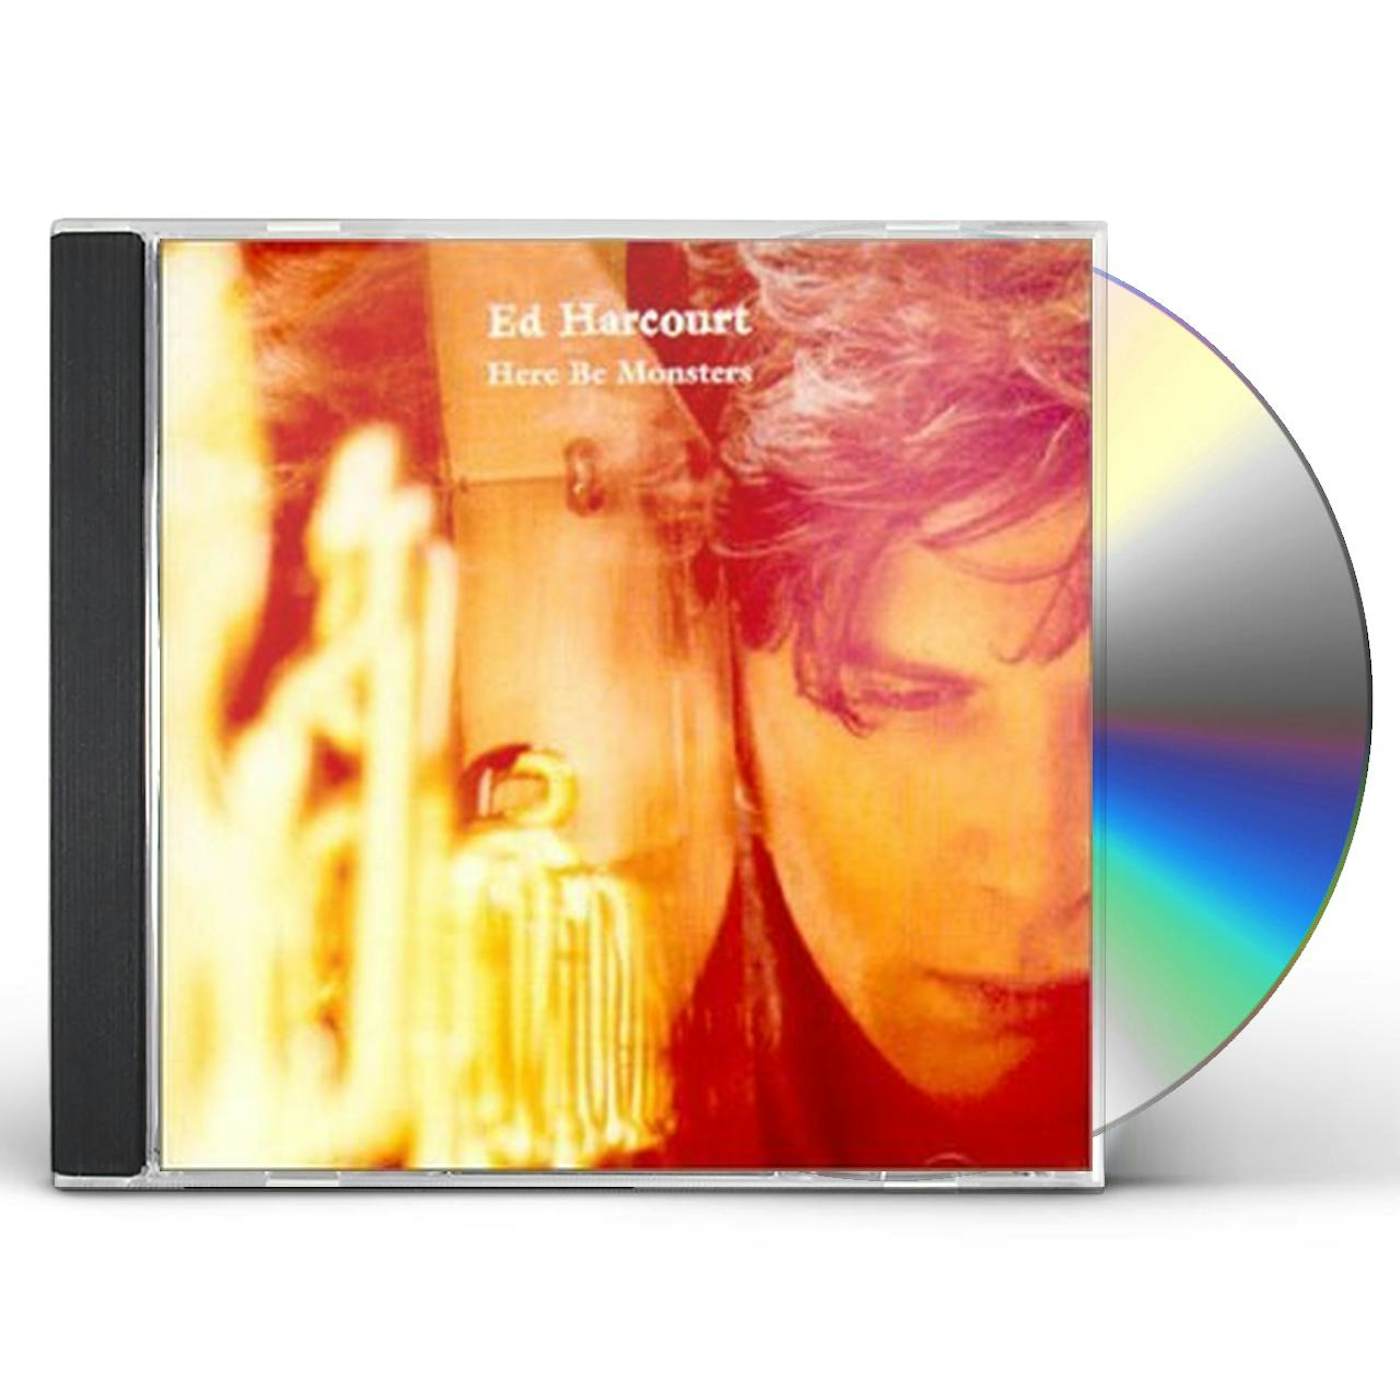 Ed Harcourt HERE BE MONSTERS CD